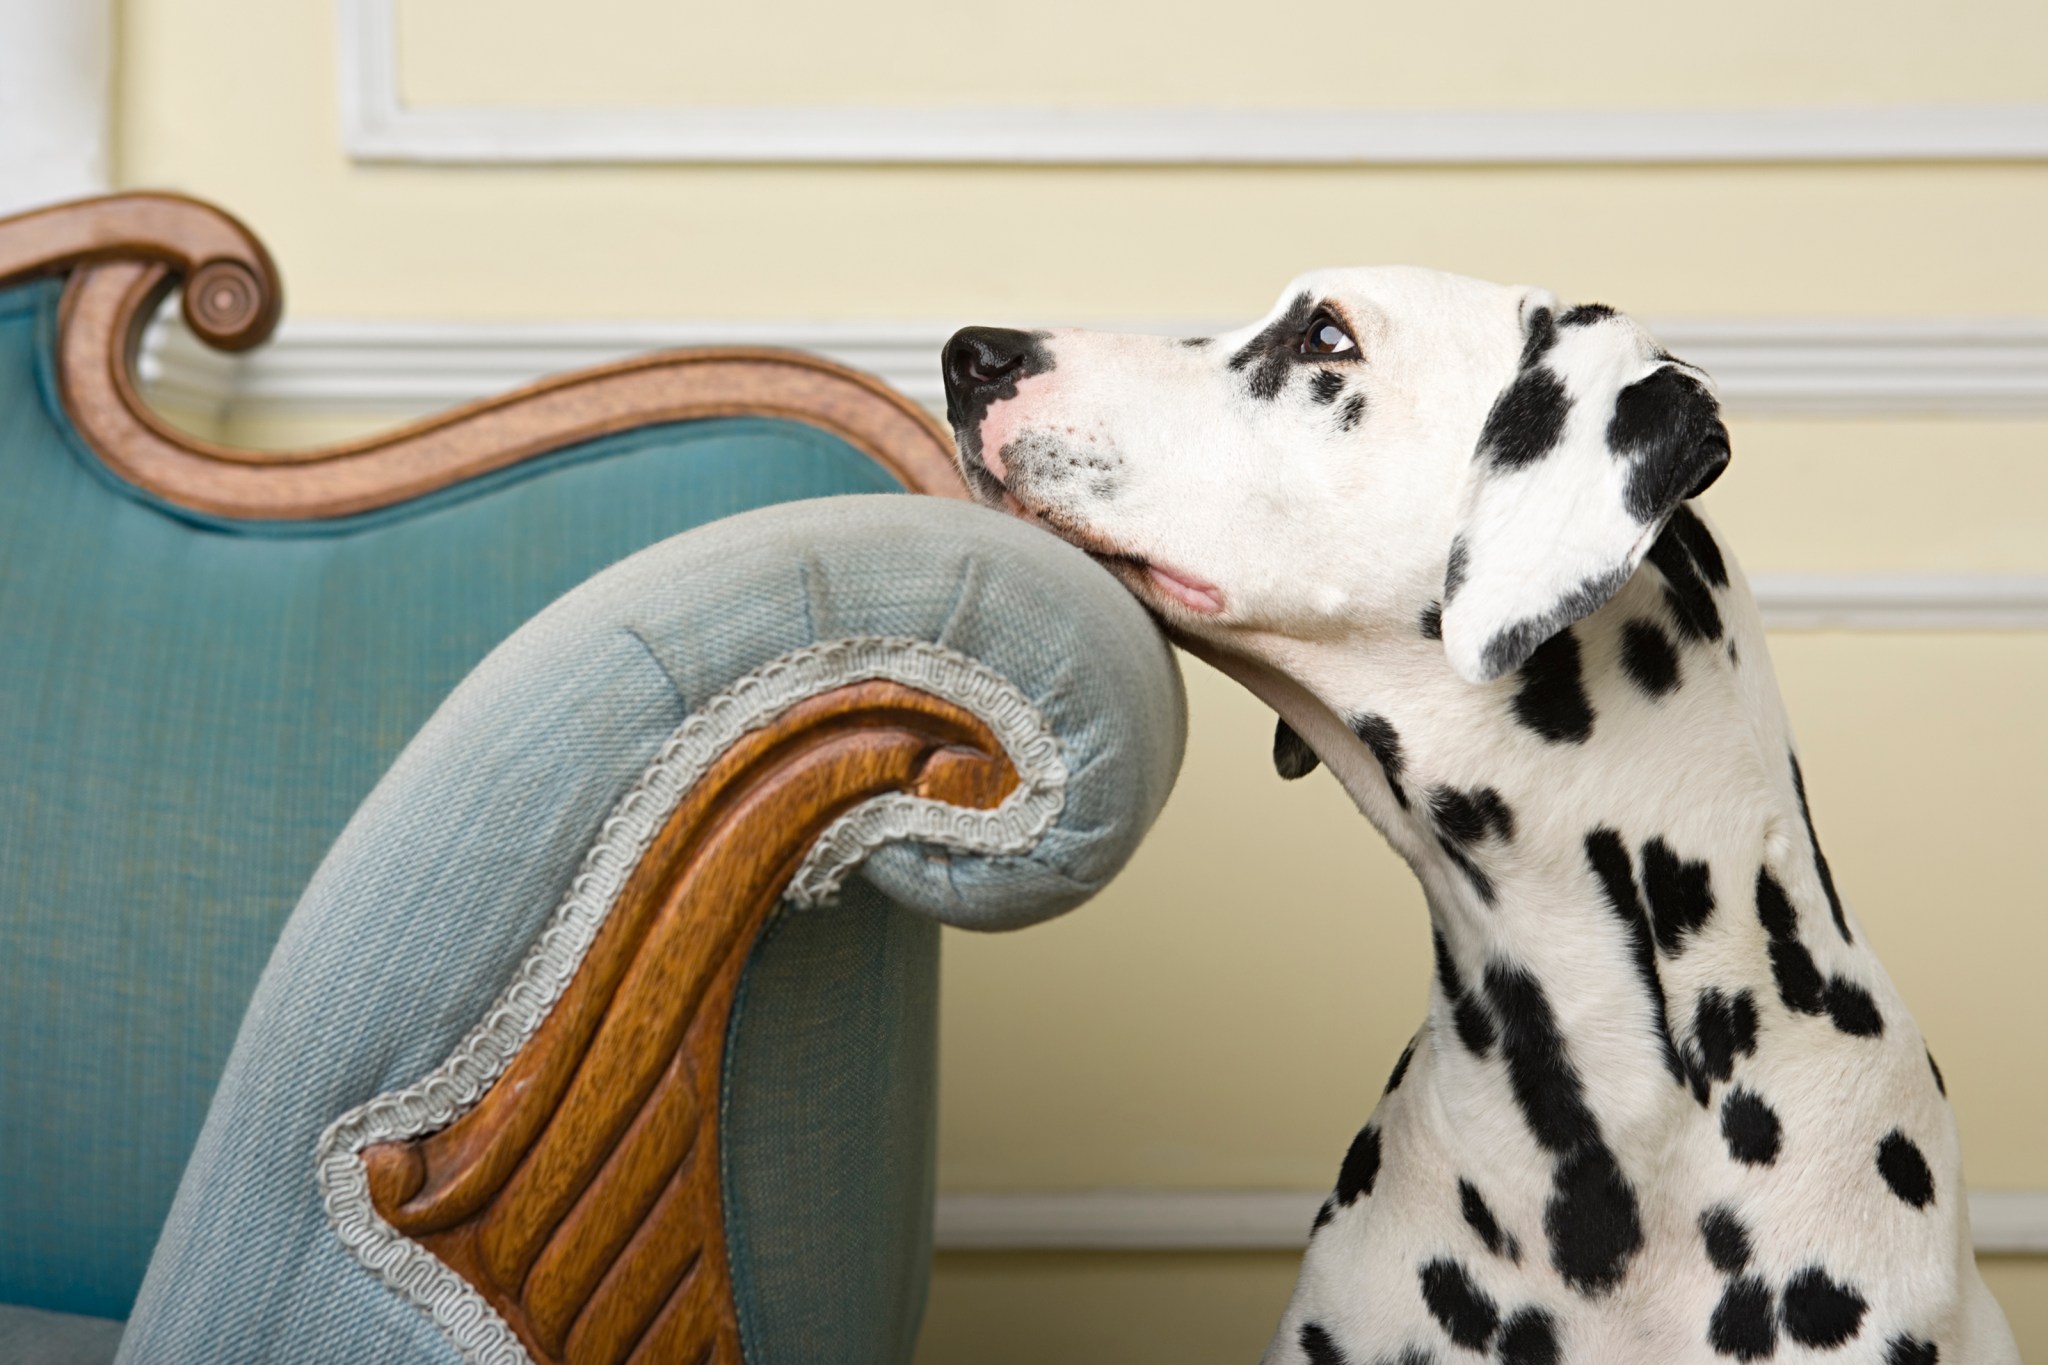 pet-friendly-homes-make-dogs-happy-dalmation-head-on-couch